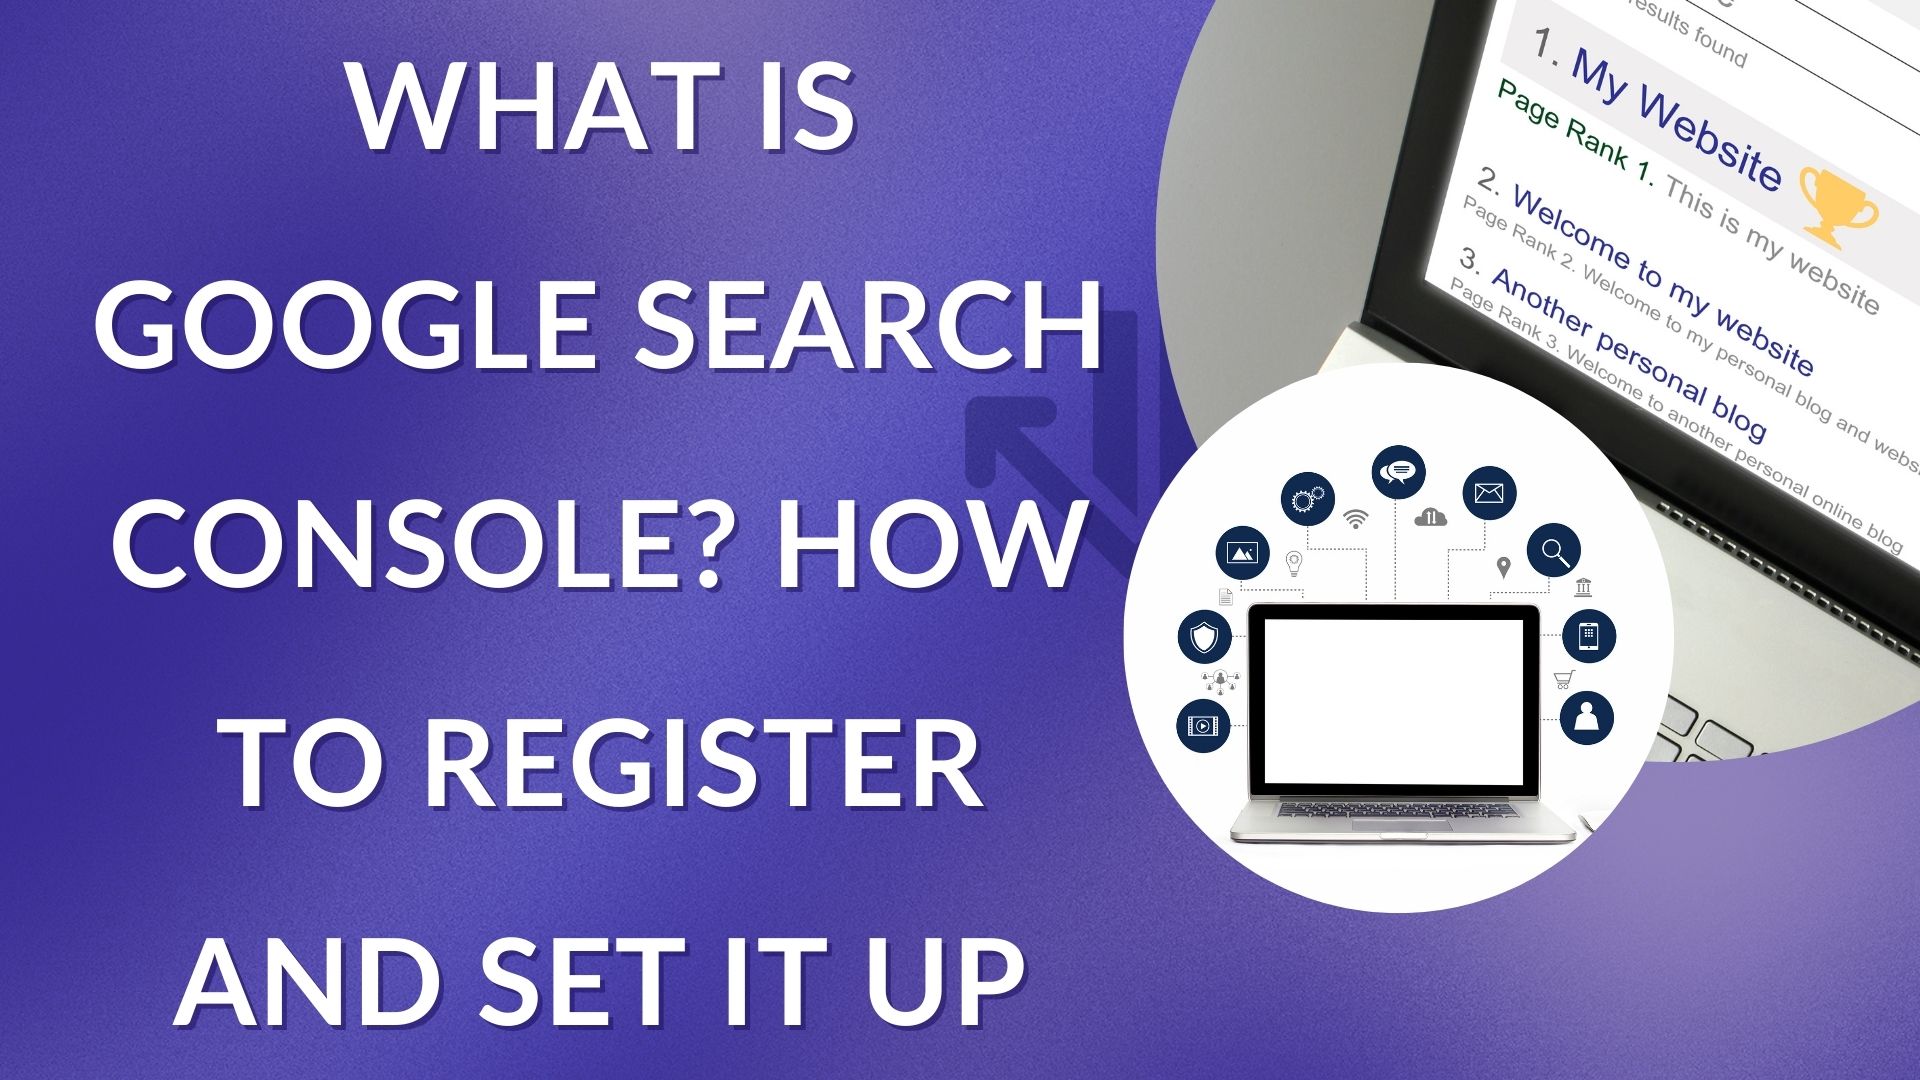 What is Google Search Console? How to Register and Set It Up